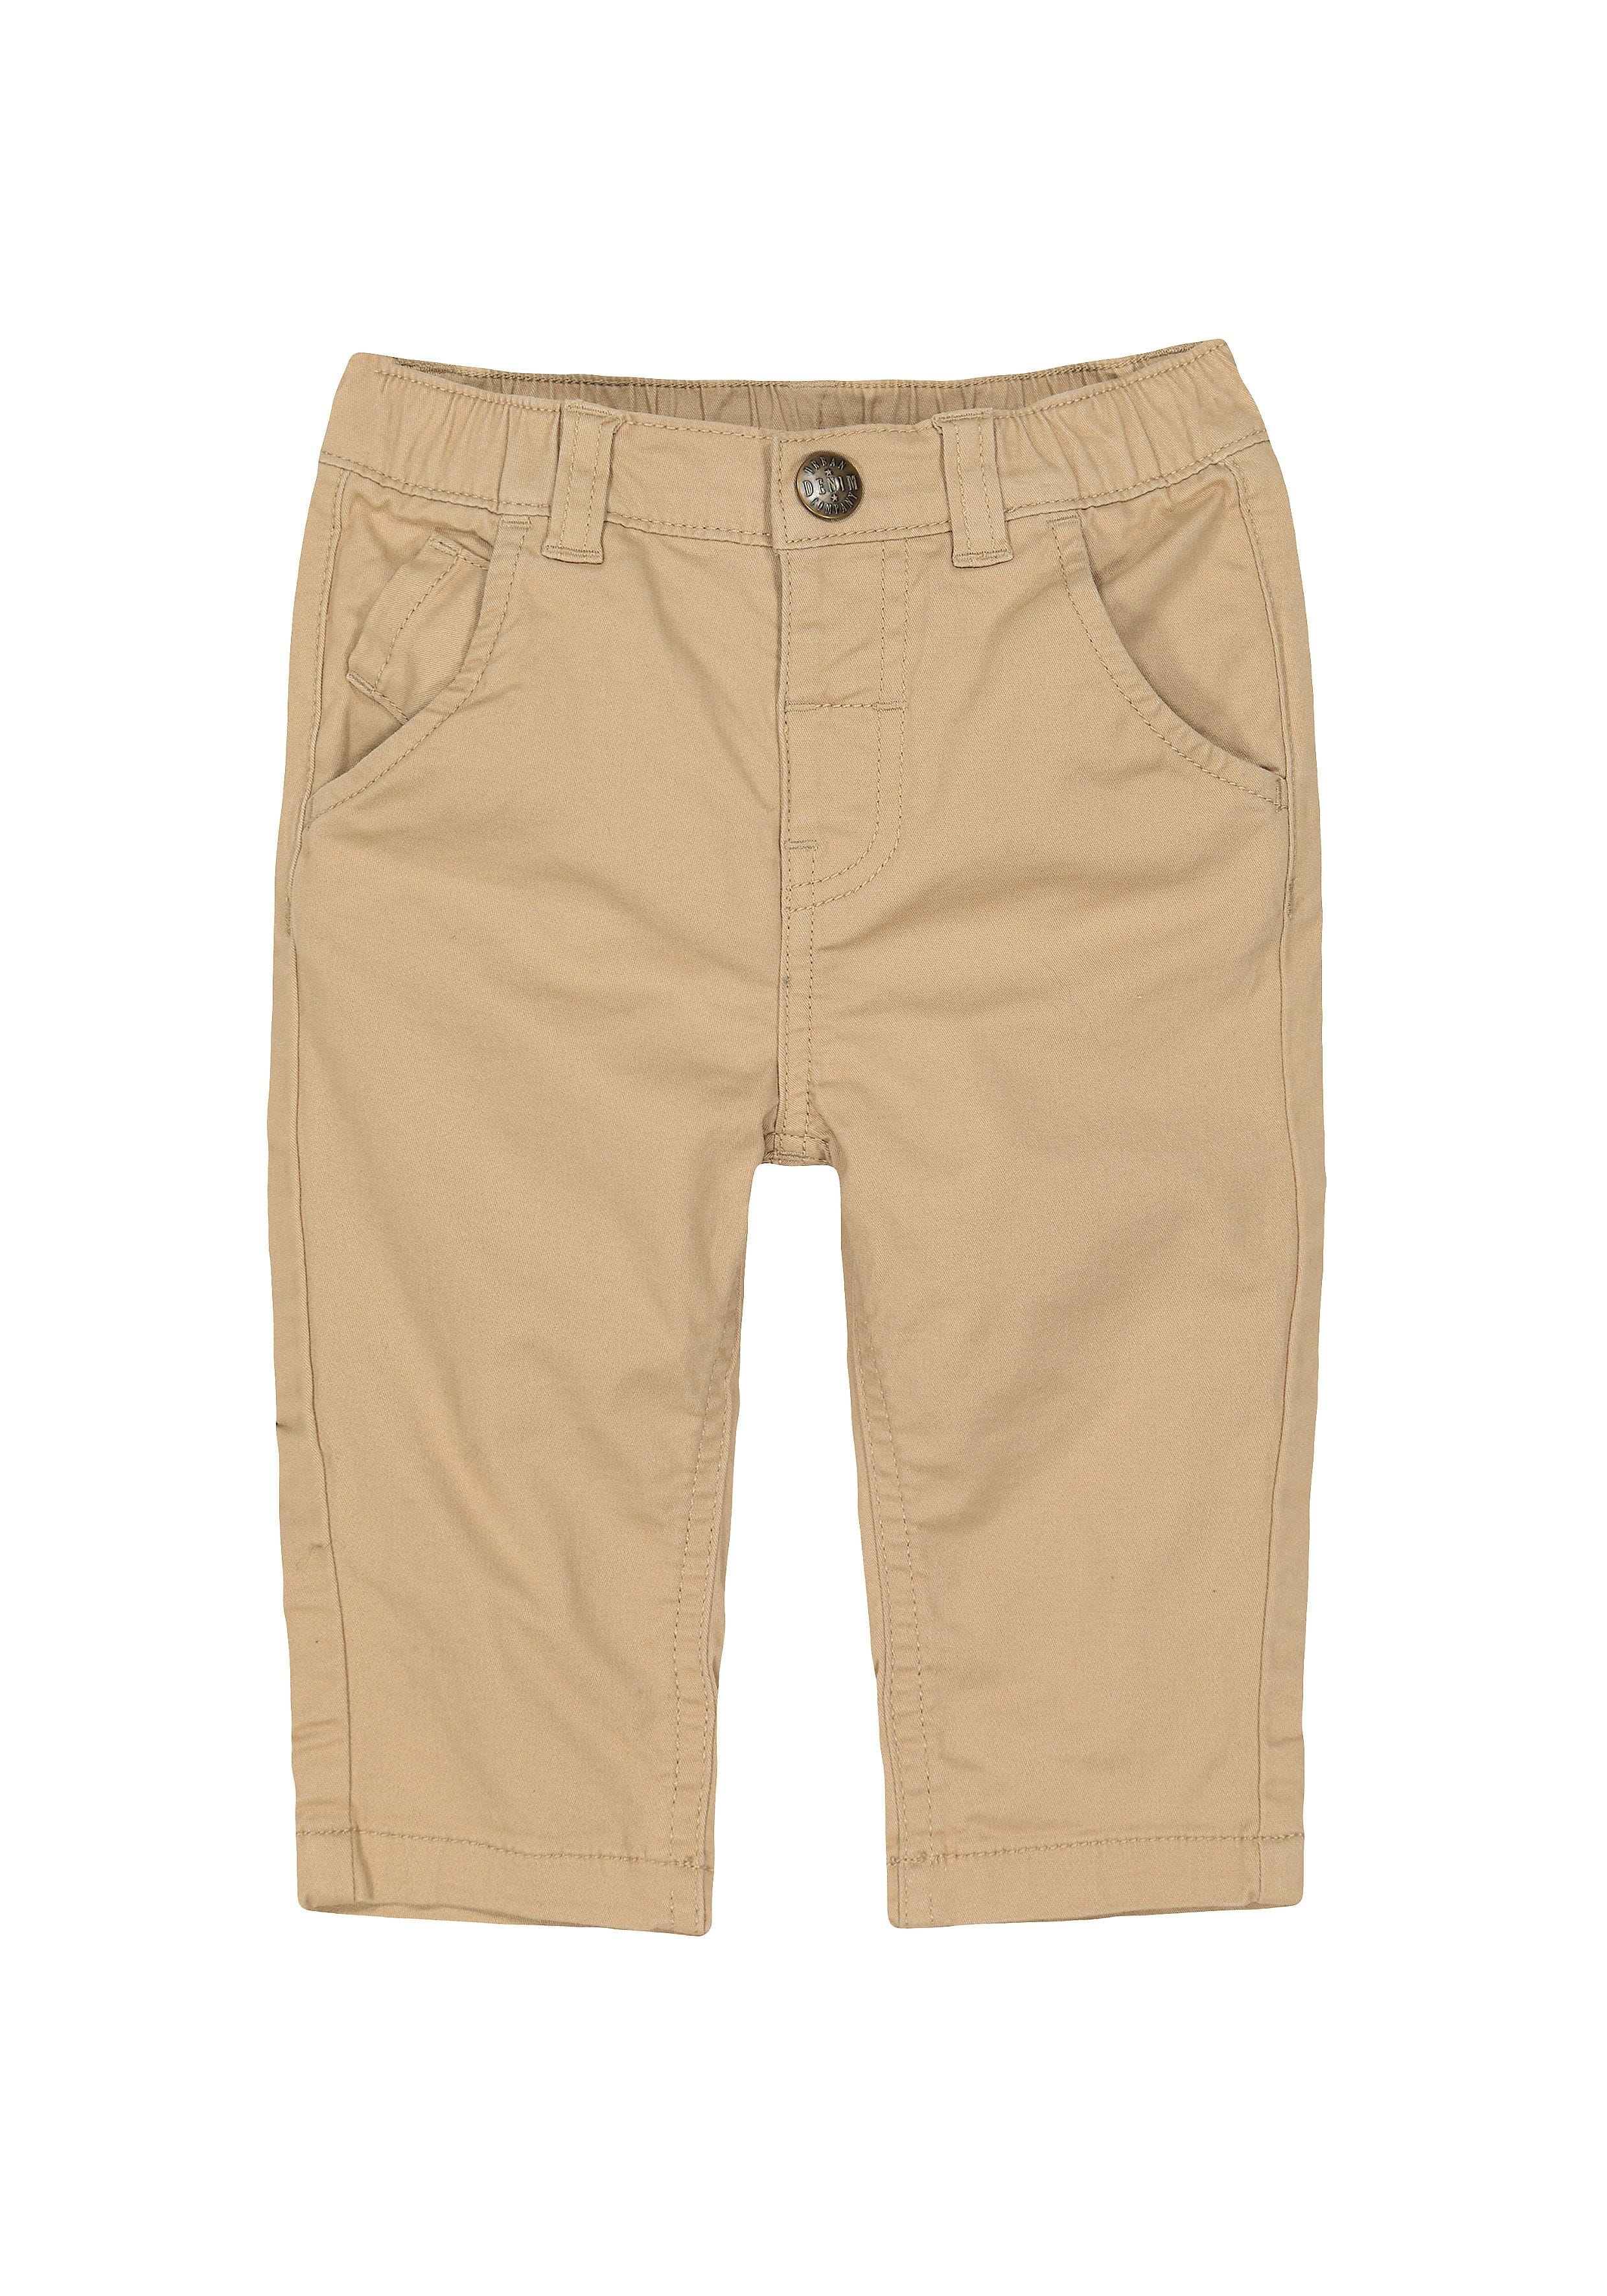 Mothercare | Boys Trousers - Beige 0